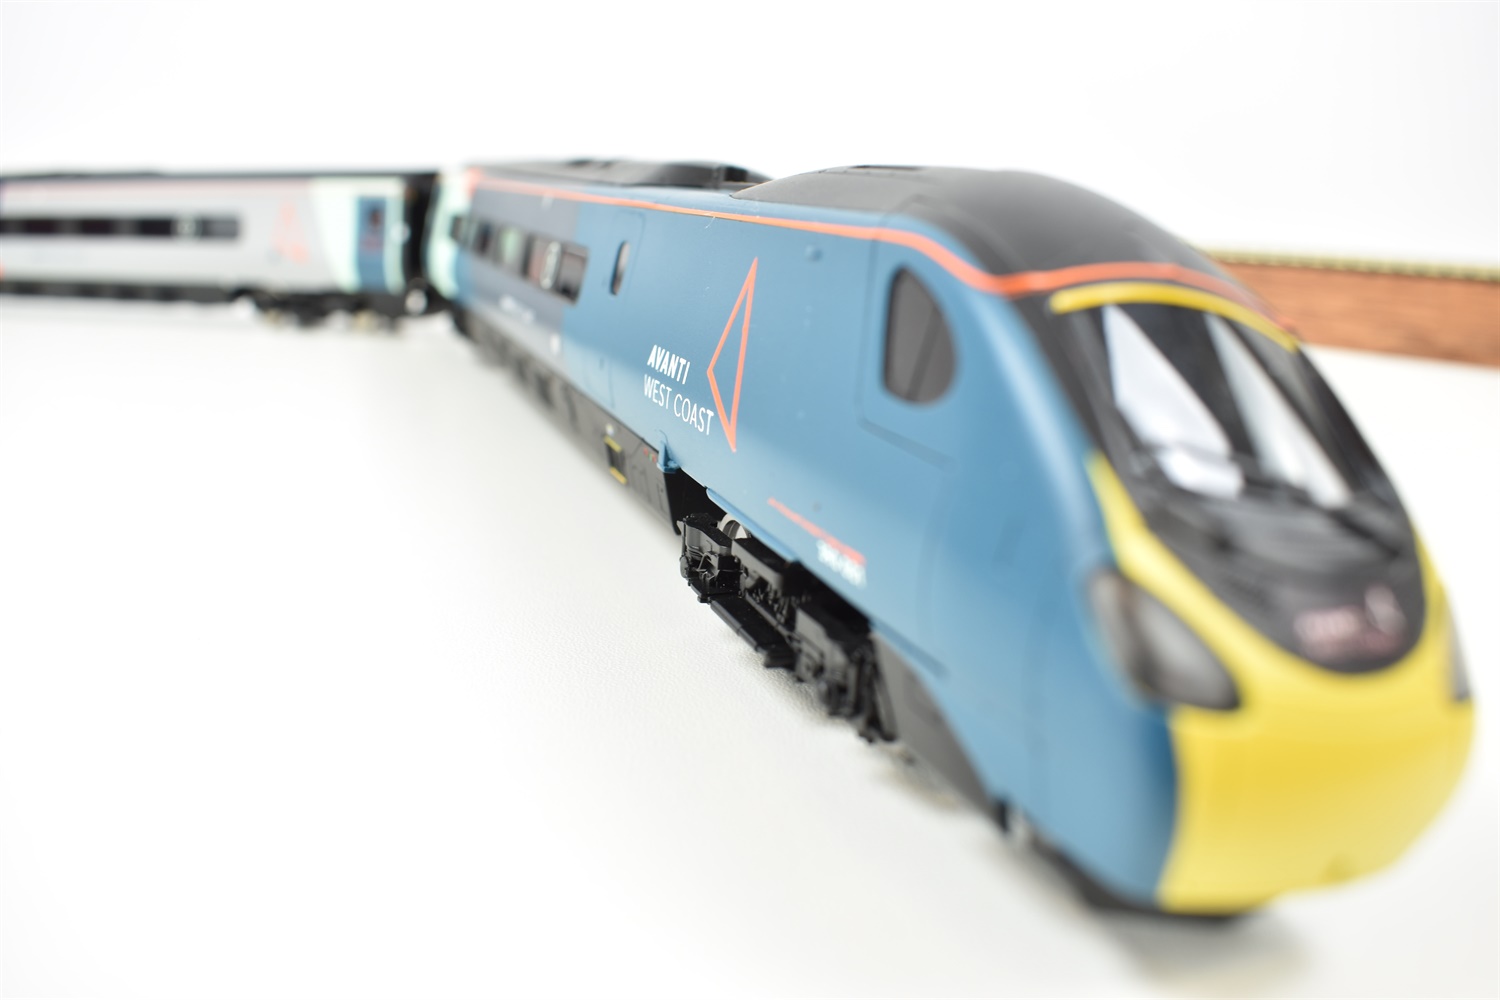 Avanti West Coast model train set to be auctioned for children’s charity